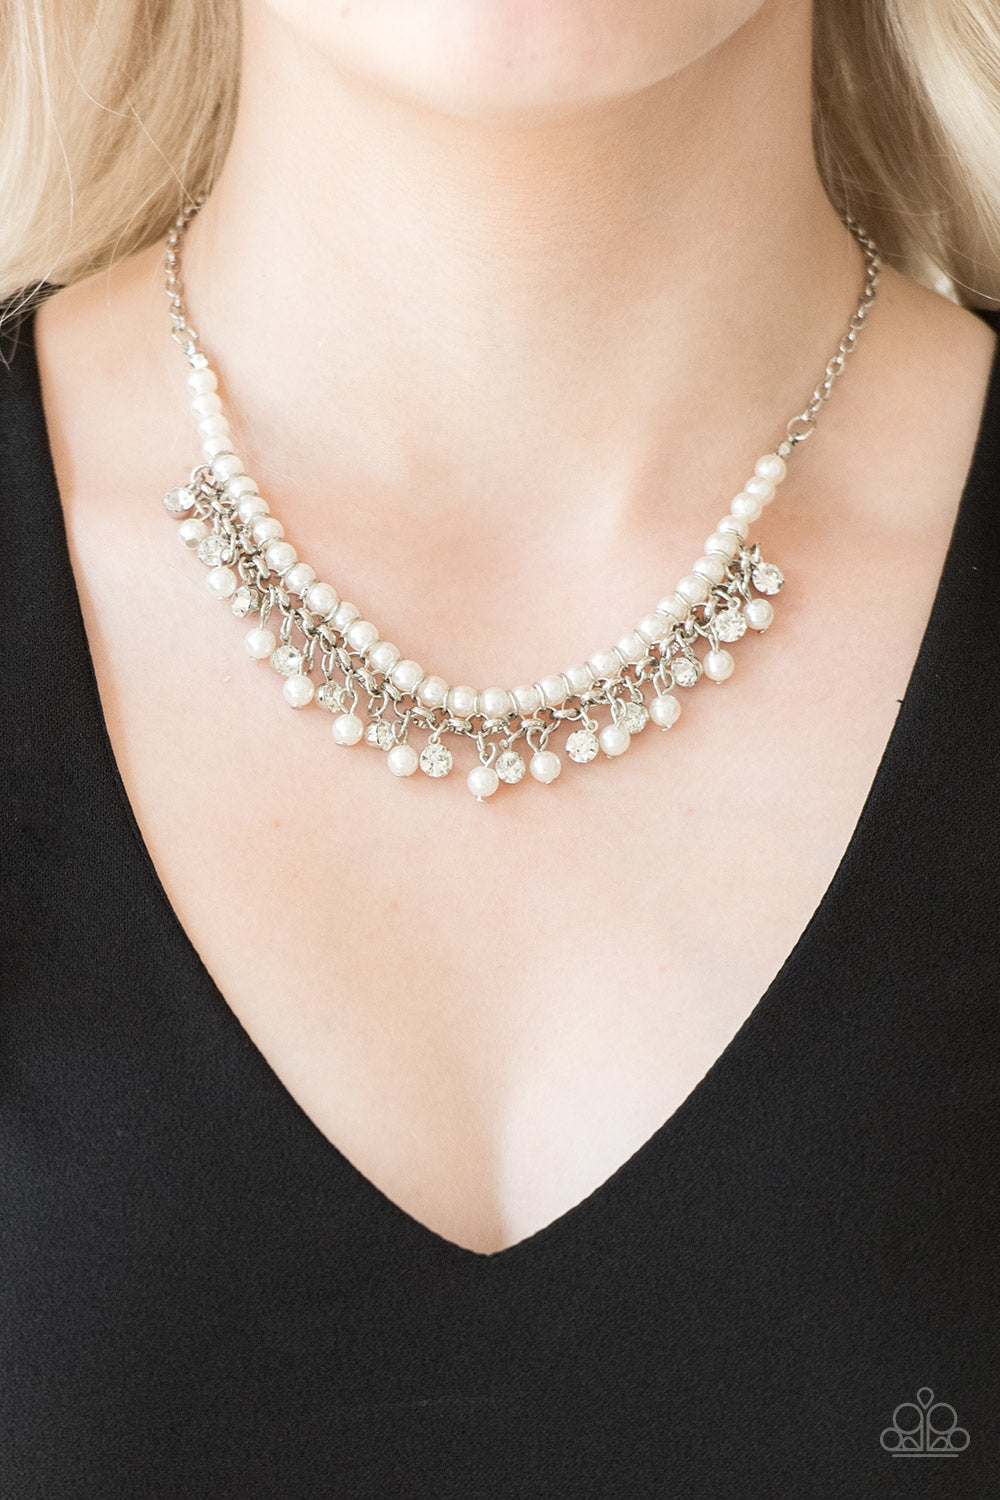 A Touch of CLASSY - white - Paparazzi necklace